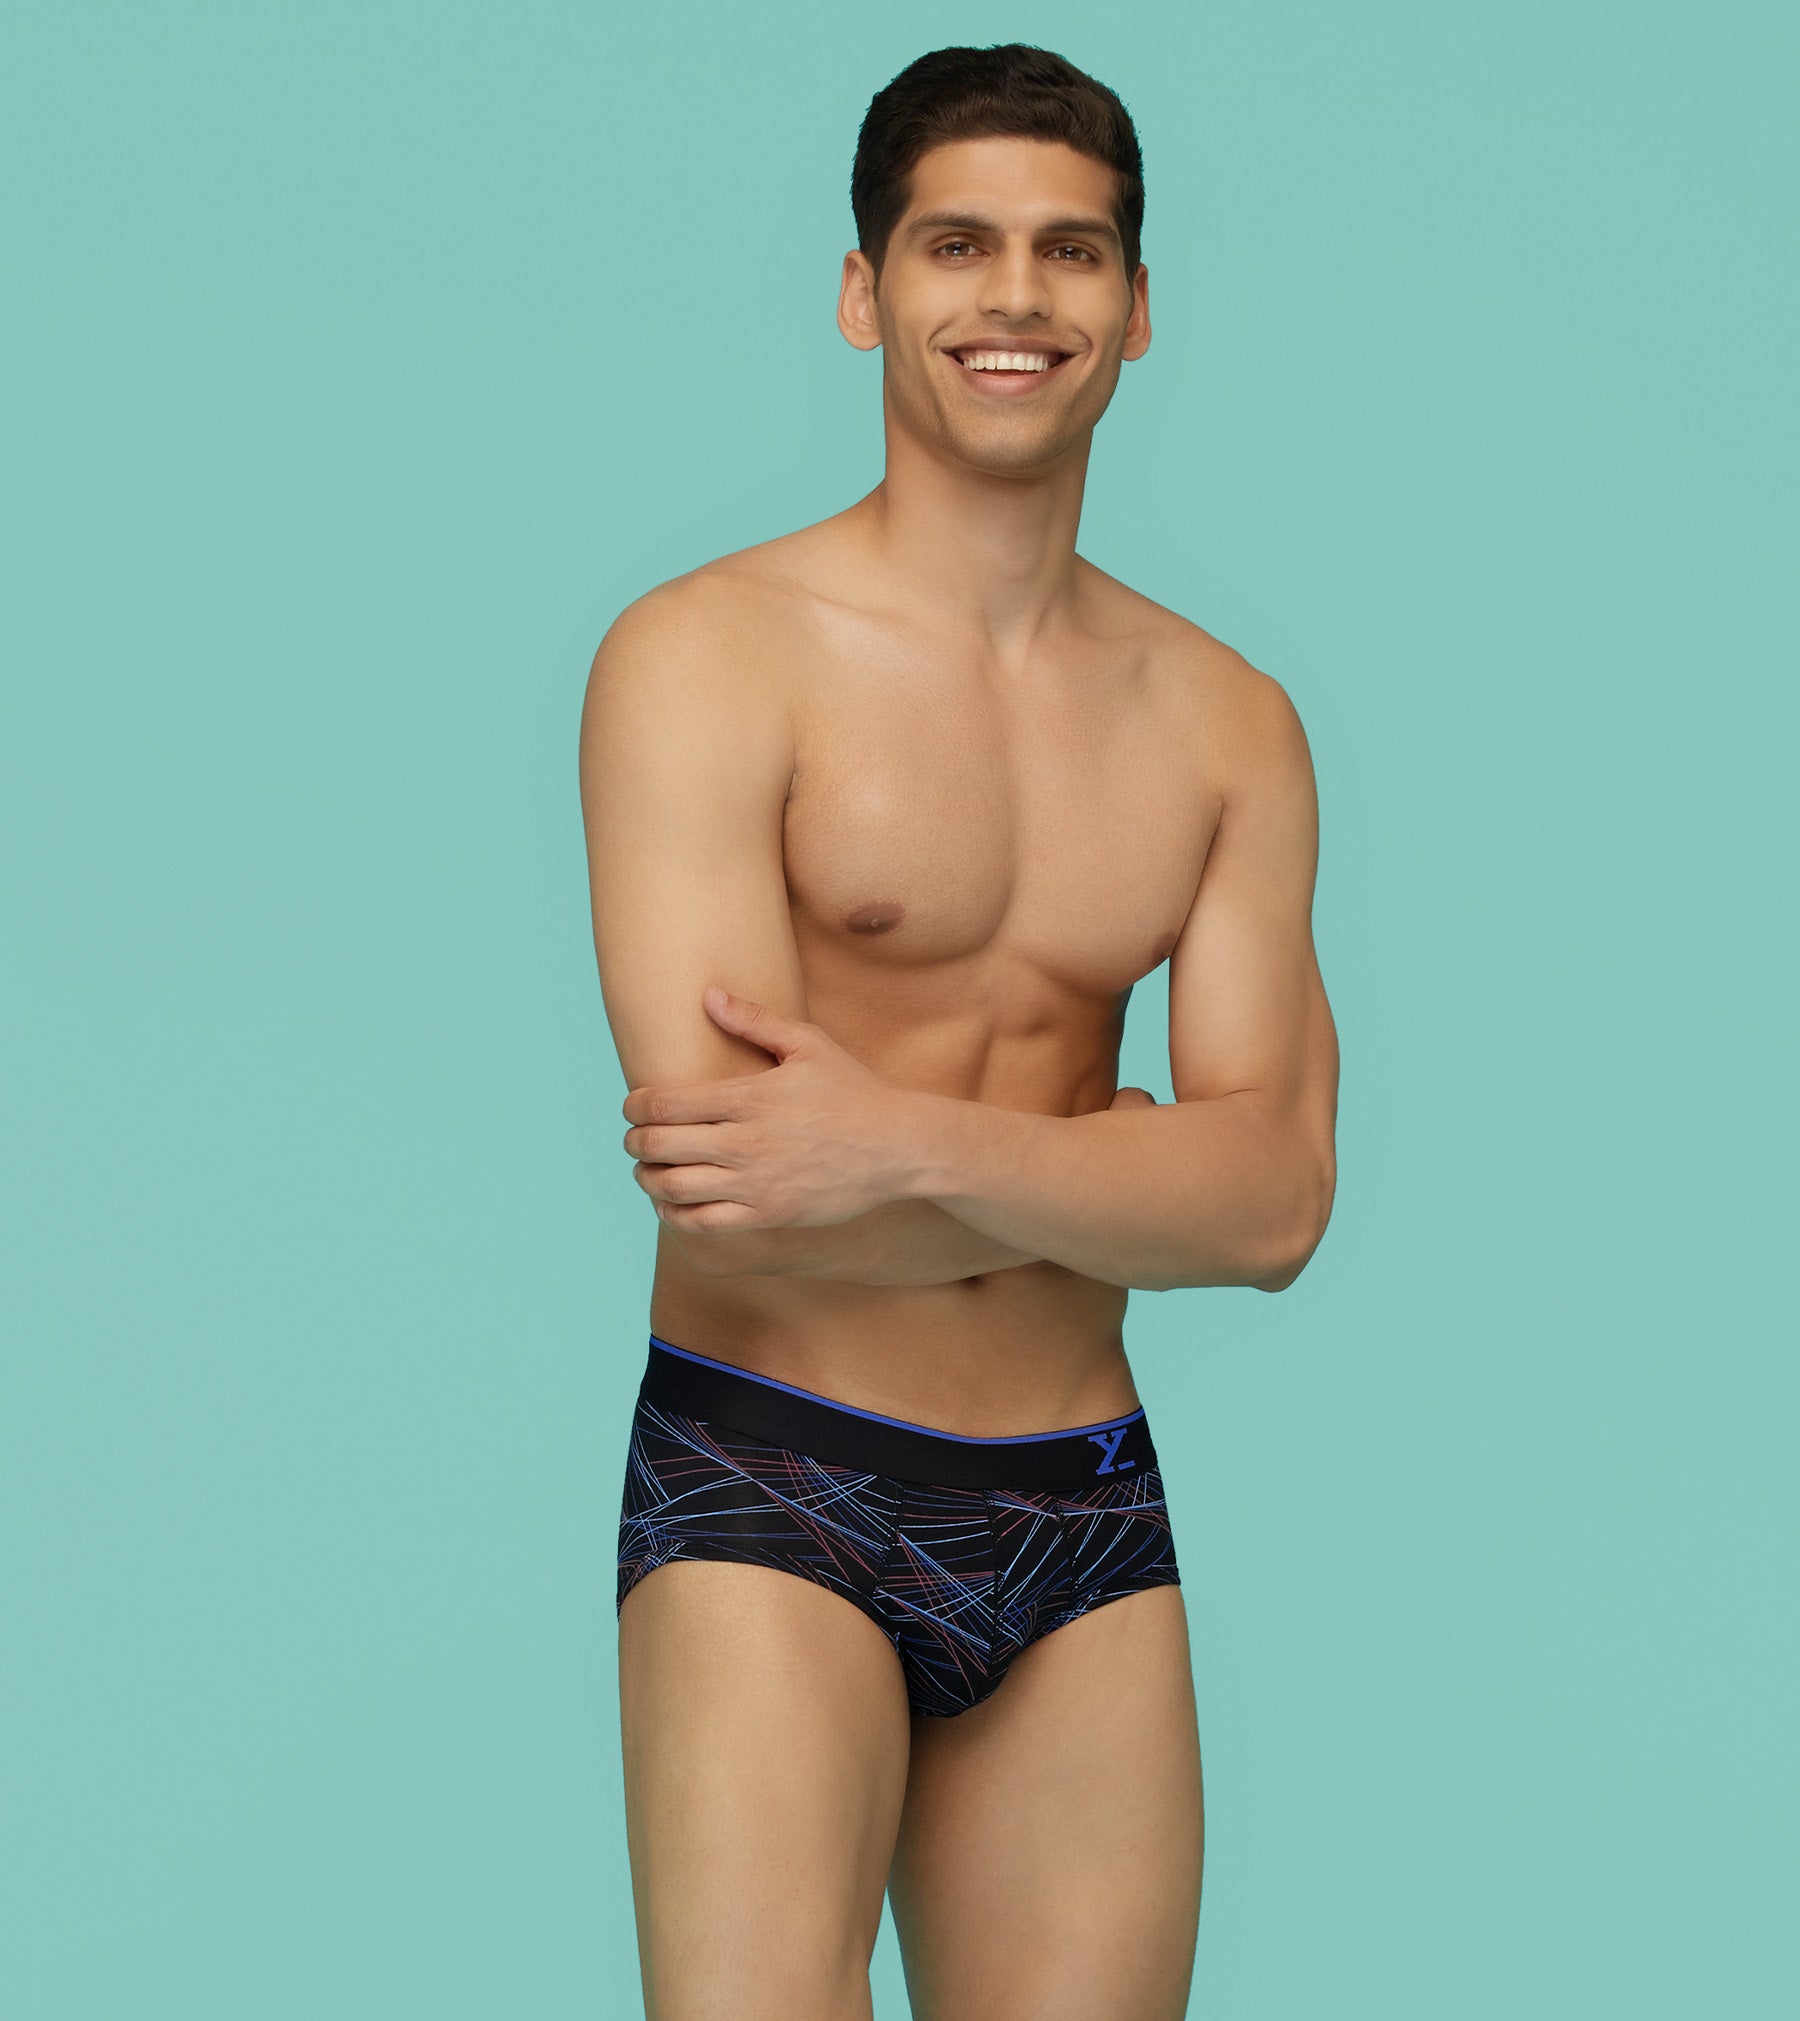 Iwear Trendz Maxx Mens Briefs And Trunks - Buy Iwear Trendz Maxx Mens  Briefs And Trunks Online at Best Prices In India